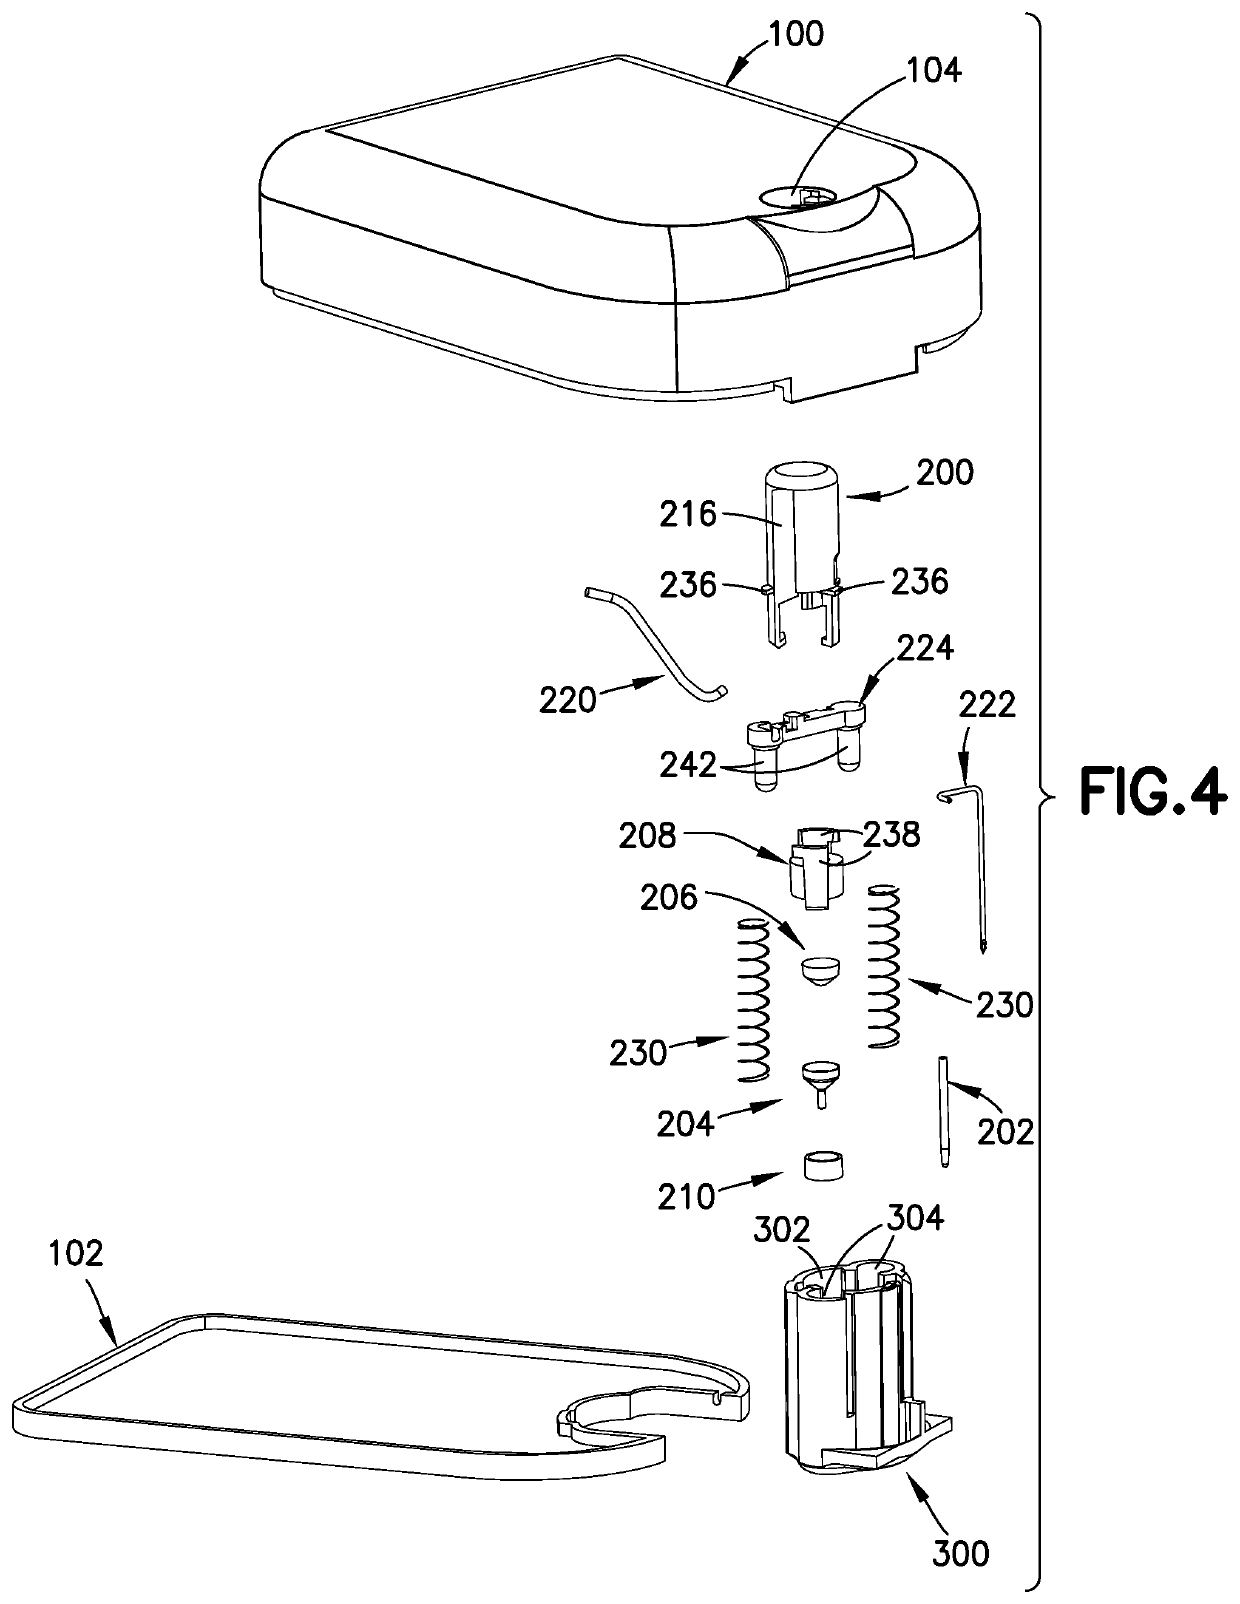 Catheter insertion device and method of inserting a catheter